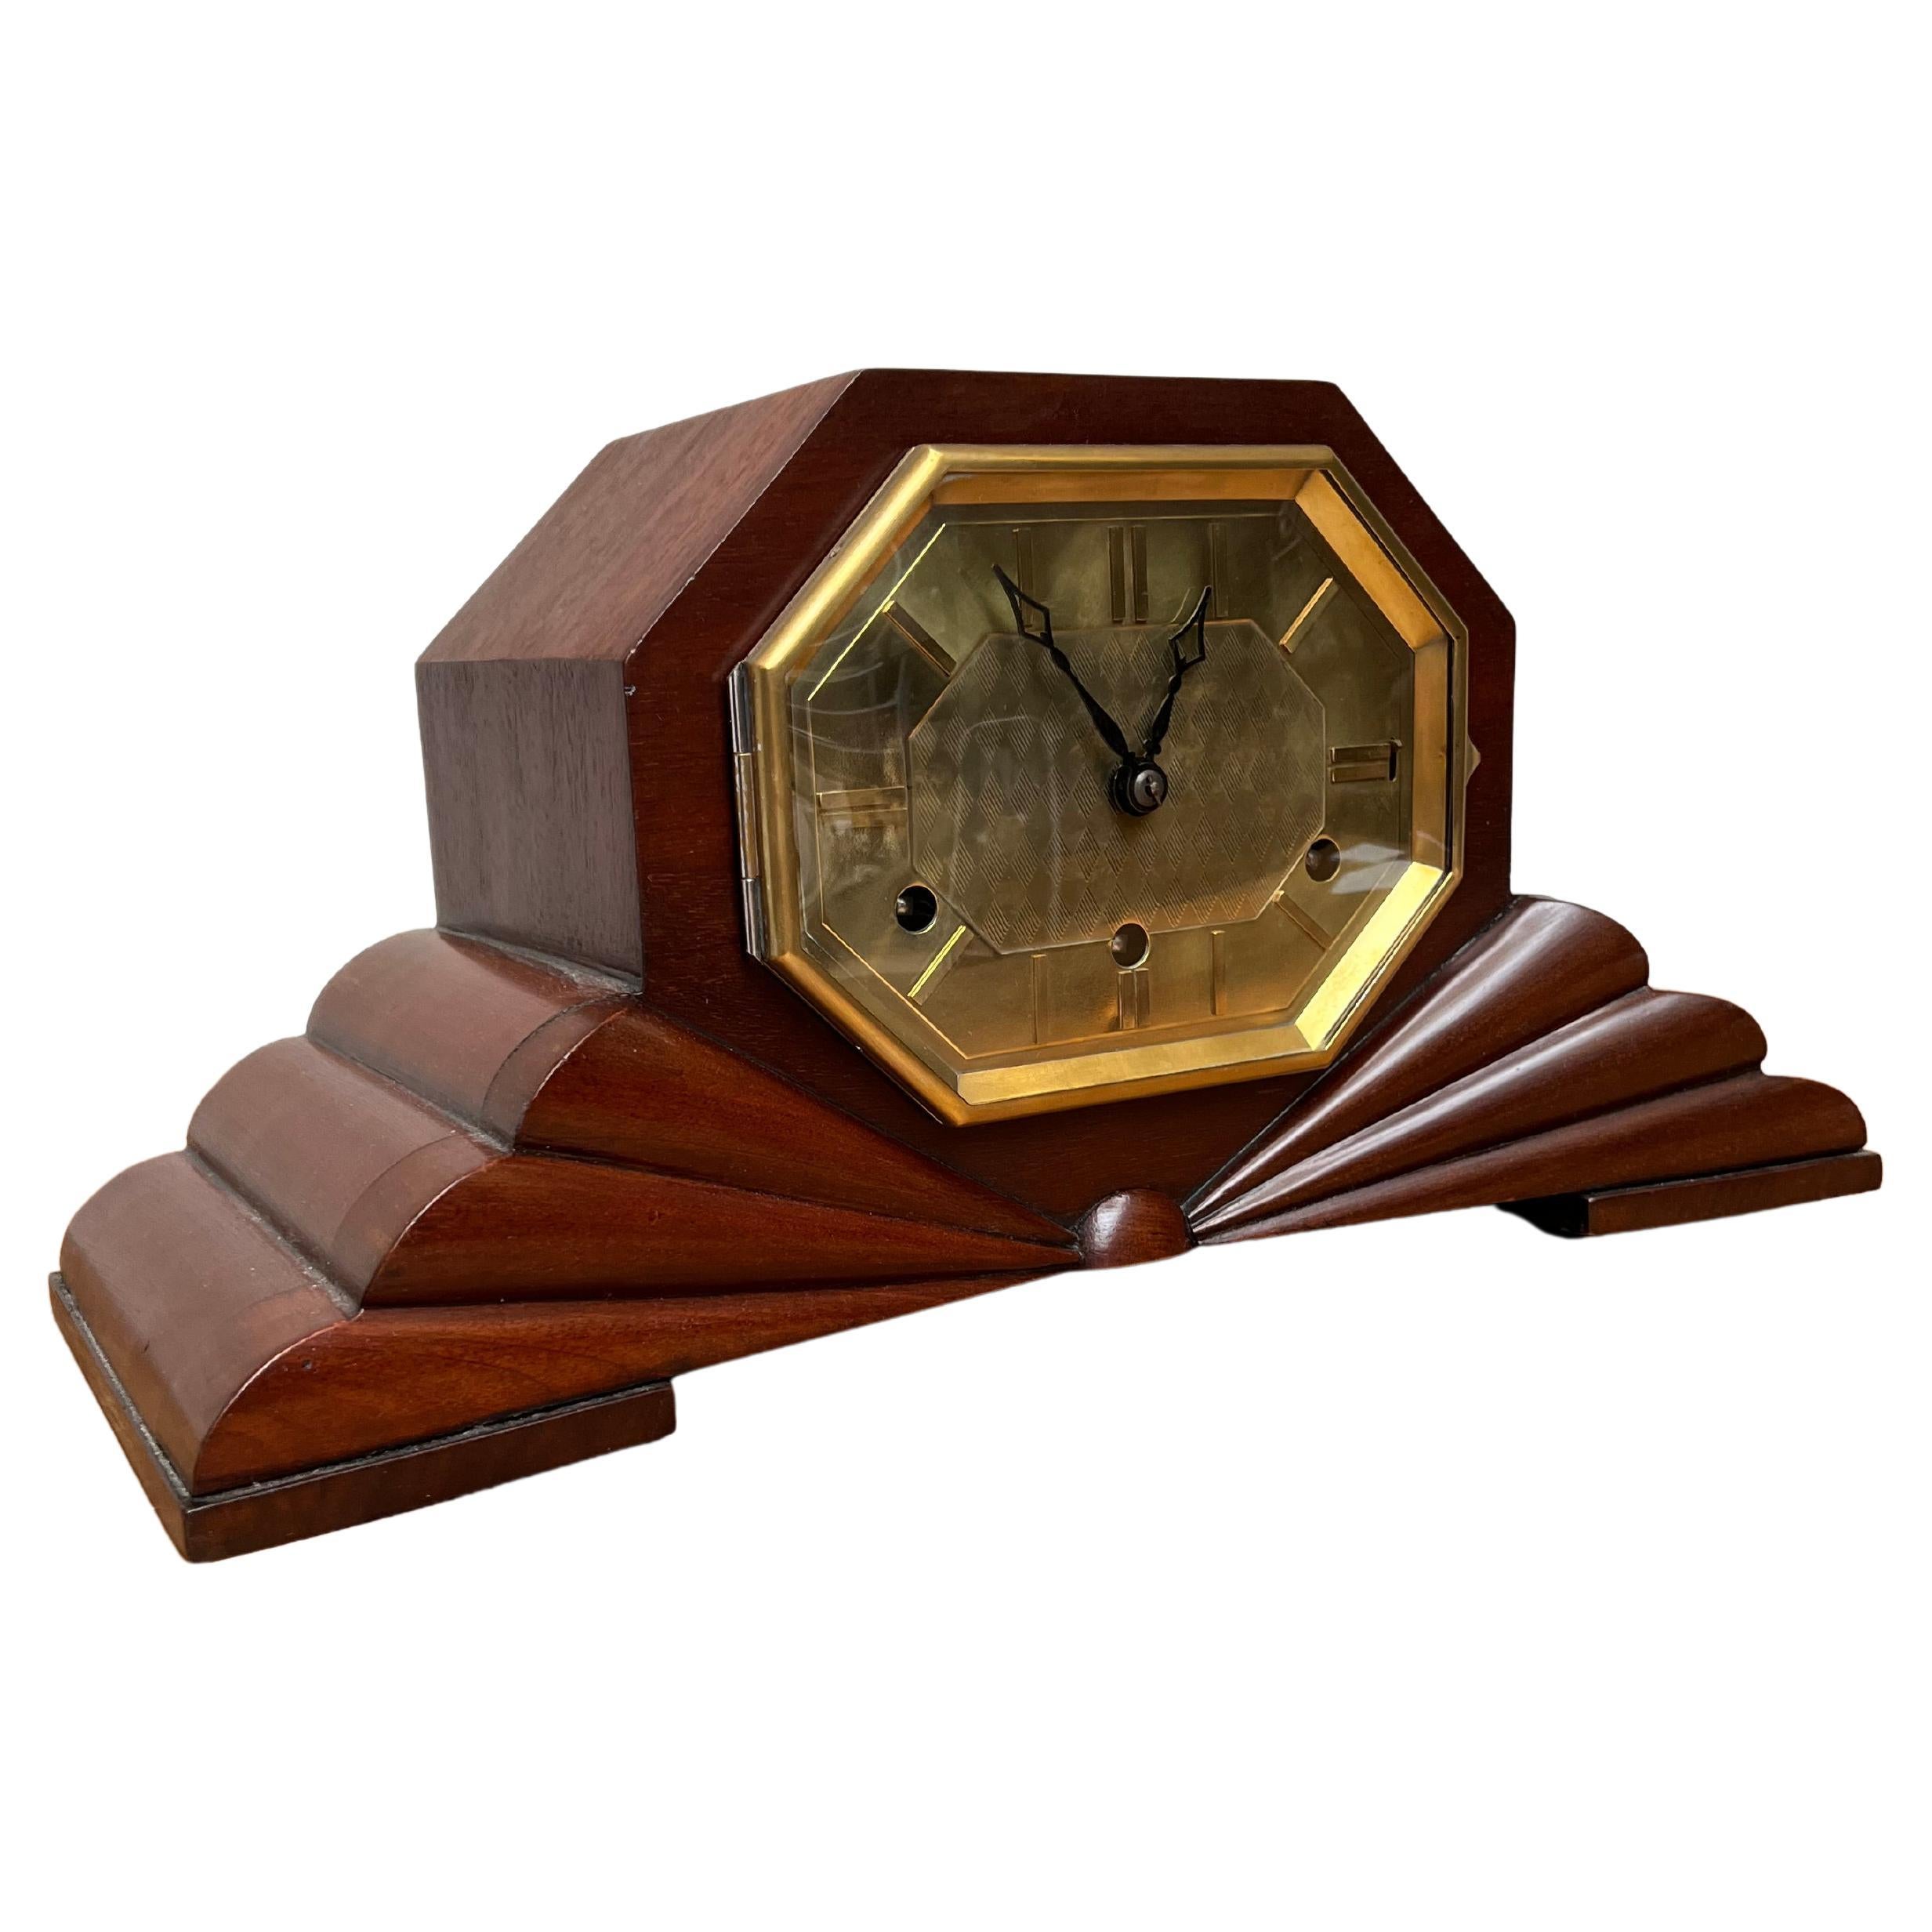 Beautiful design and also practical in size Art Deco table clock.

Over the years we have sold a number of striking (no pun intended) Art Deco clocks, but never one as cool and almost futuristic looking and perfectly symmetrical as this one. The